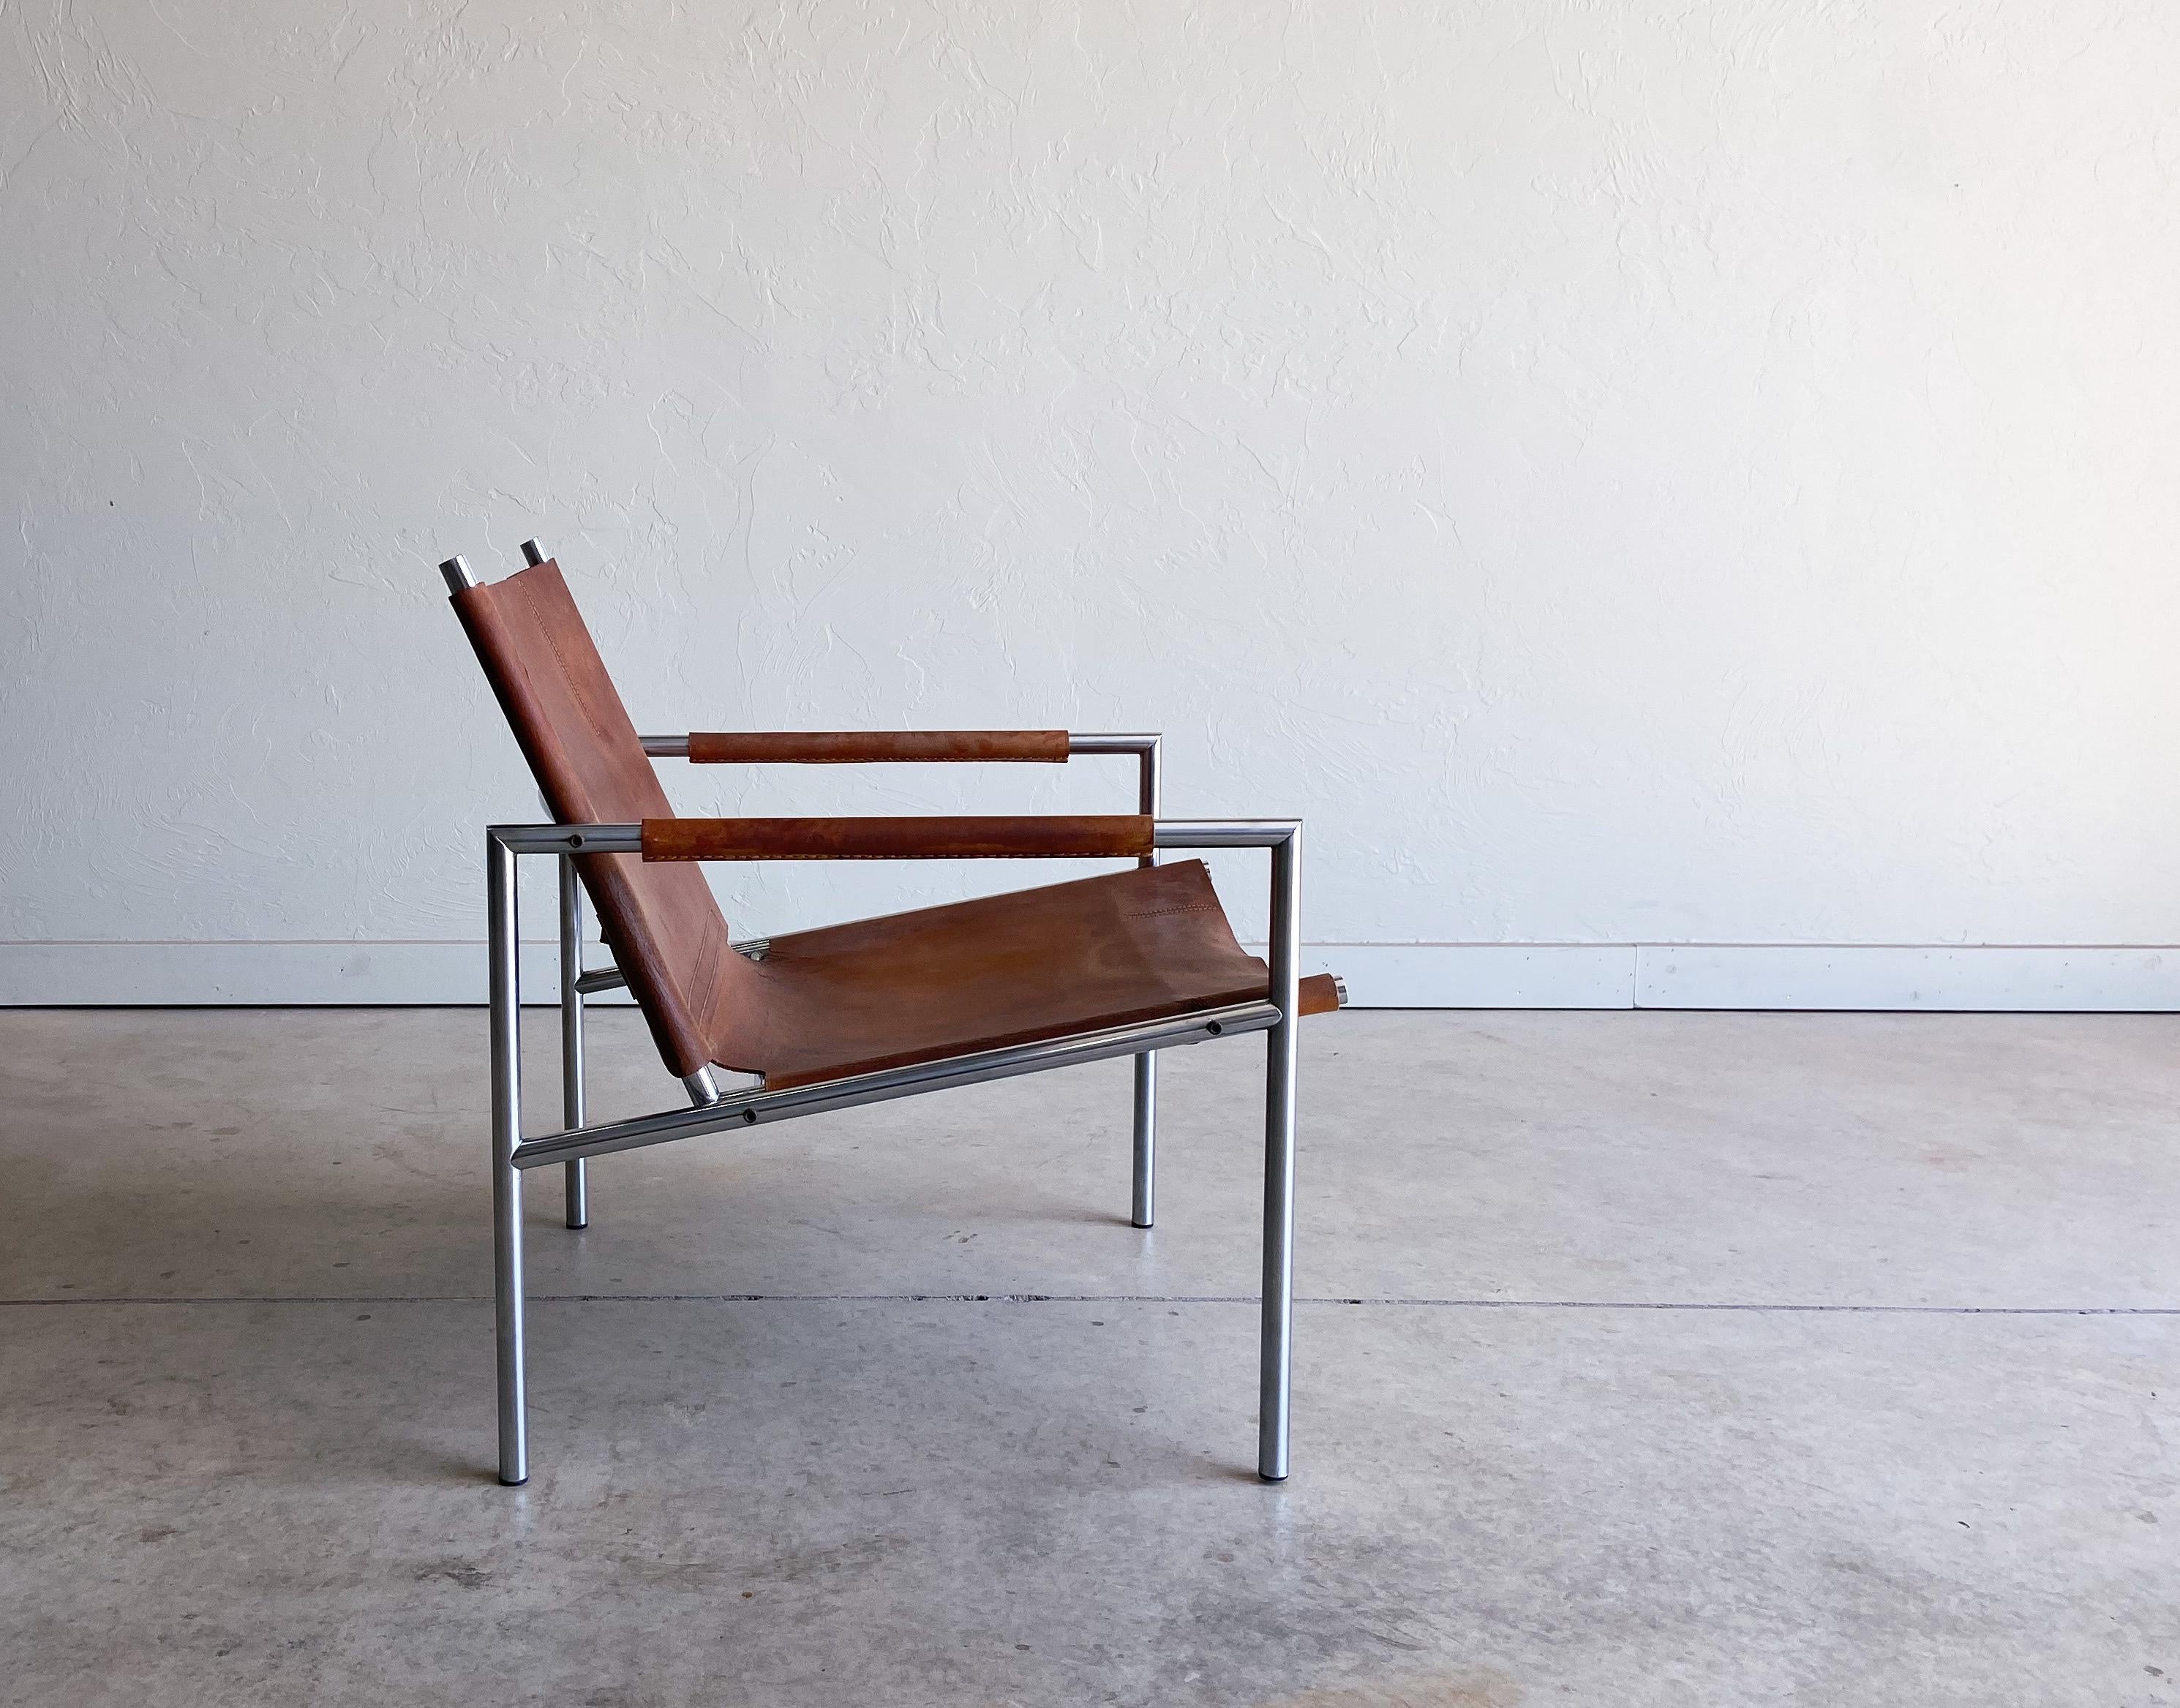 A beautiful lounge chair designed by Martin Visser, model SZ02. Featuring a thick, one piece saddle leather seat supported by a chromed steel frame. Ergonomic and comfortable. An overall wonderful chair with a great stance and appearance.

The